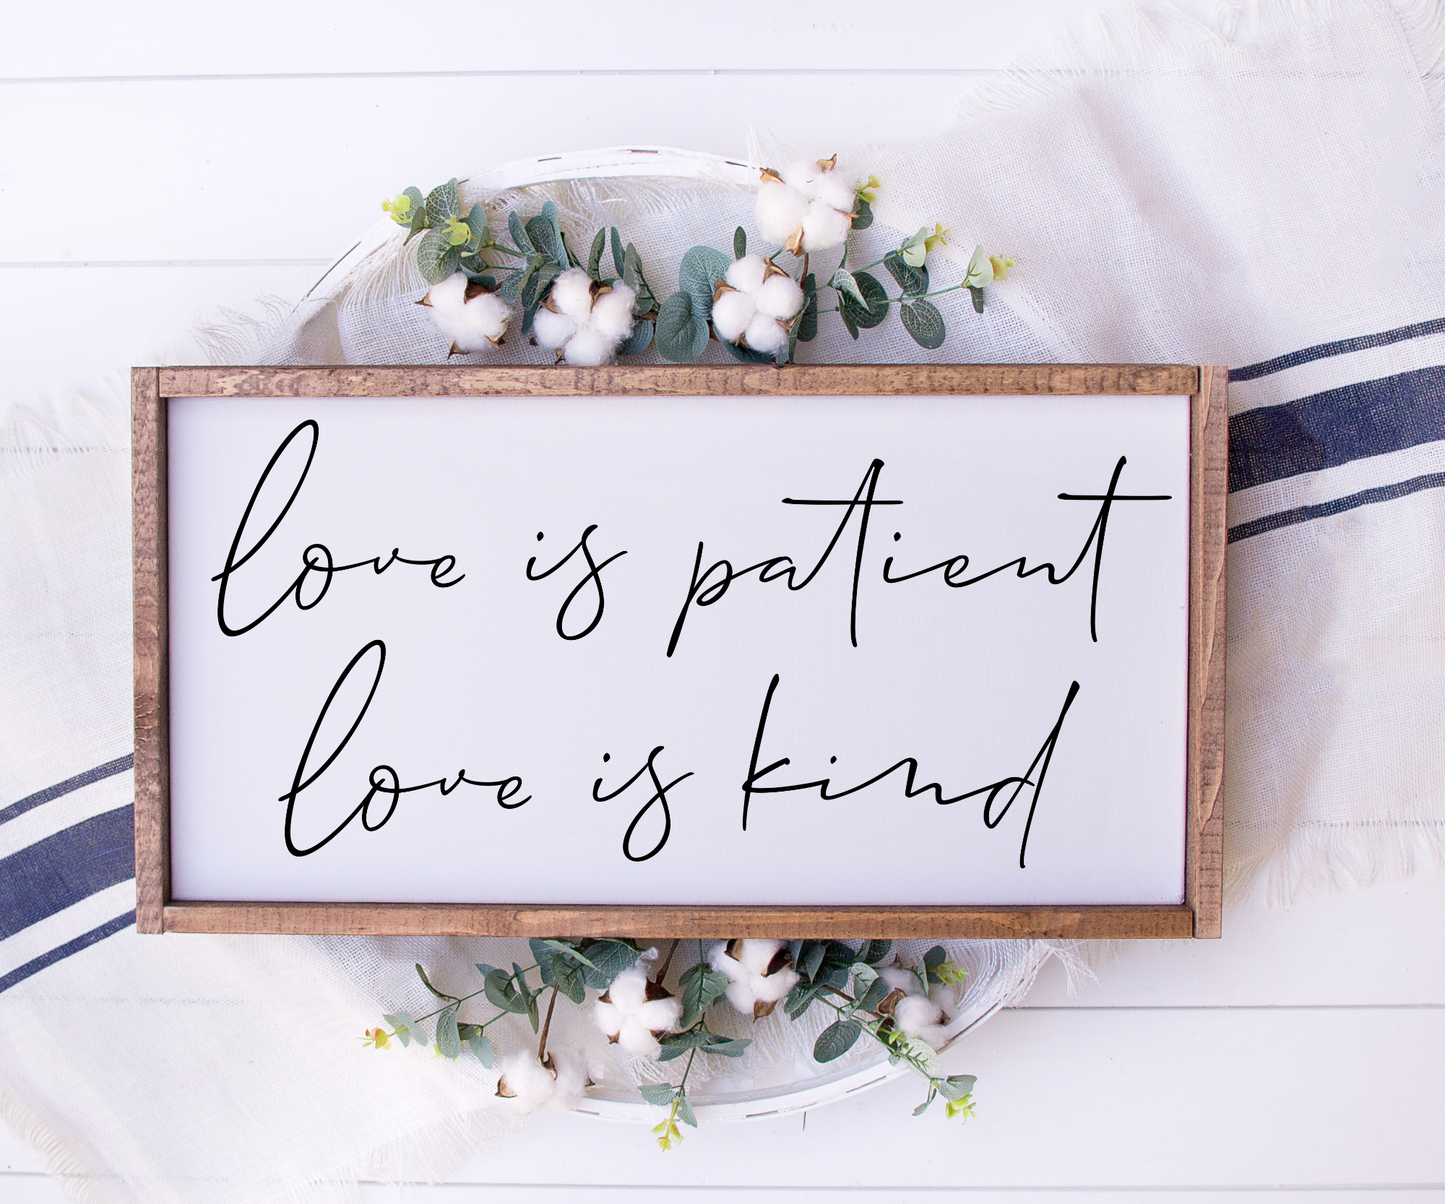 love is patient, love is kind